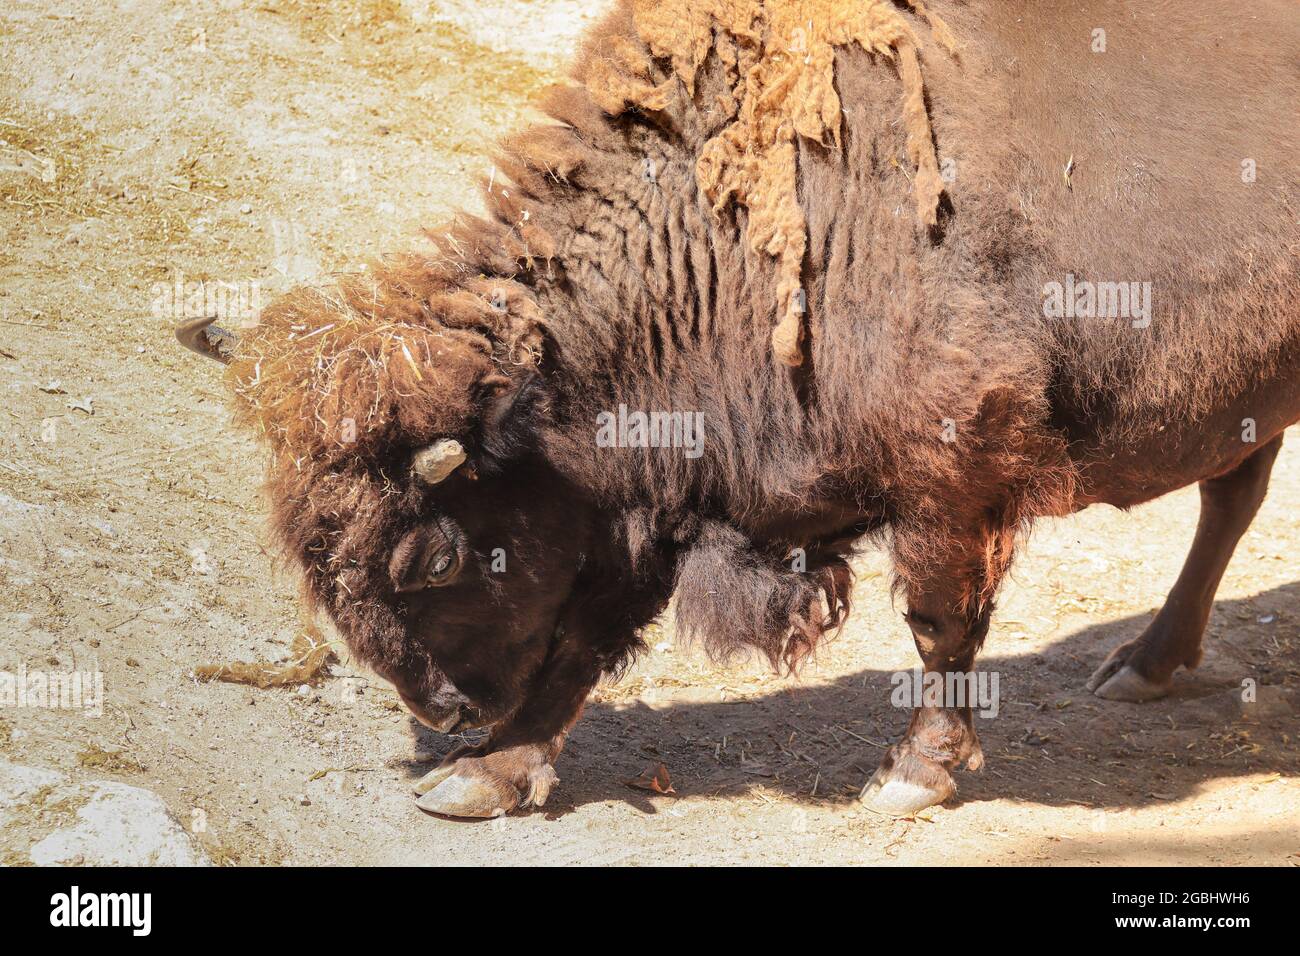 American bison on a prairie Stock Photo